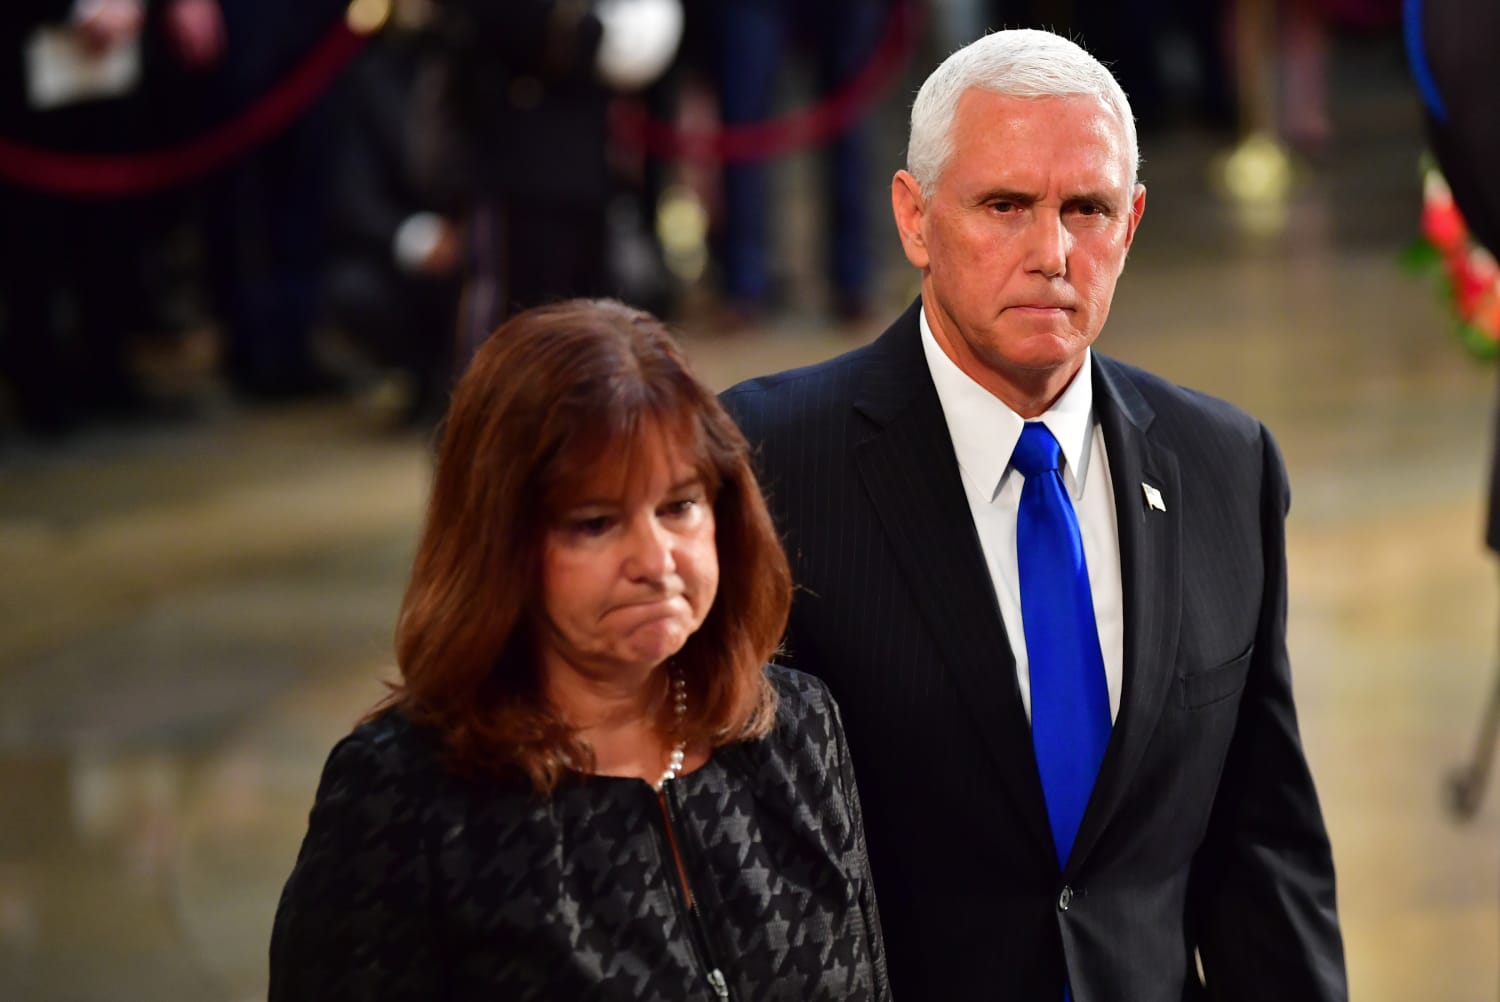 Pence Says He And His Wife Will Be Tested For Coronavirus After Staffer Tests Positive